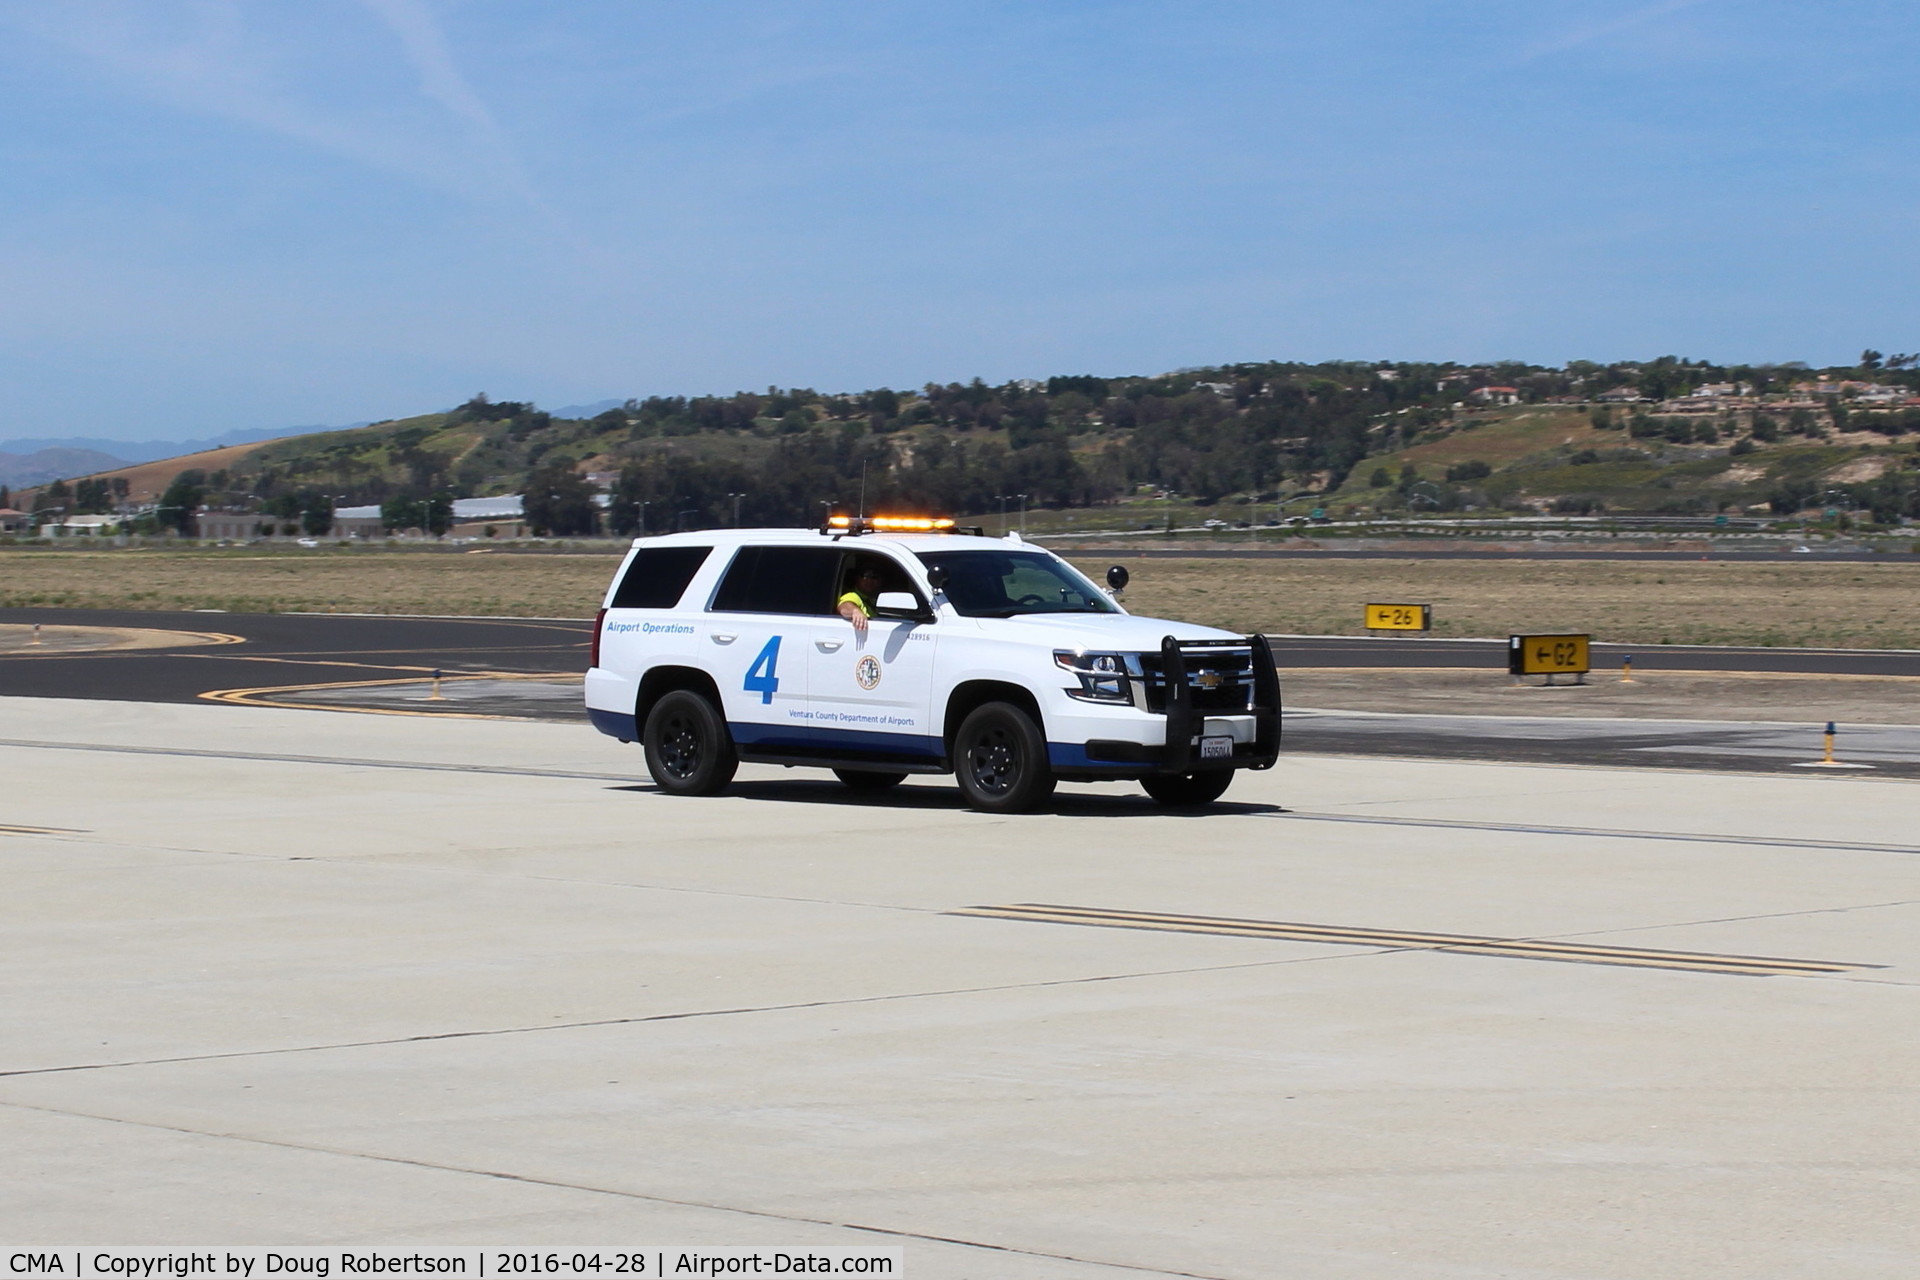 Camarillo Airport (CMA) - Airport Roving Patrol vehicles serve airfield security. AOPA FLY-IN attracts a large number of visiting aircraft/members to many simultaneous seminars and added spectators